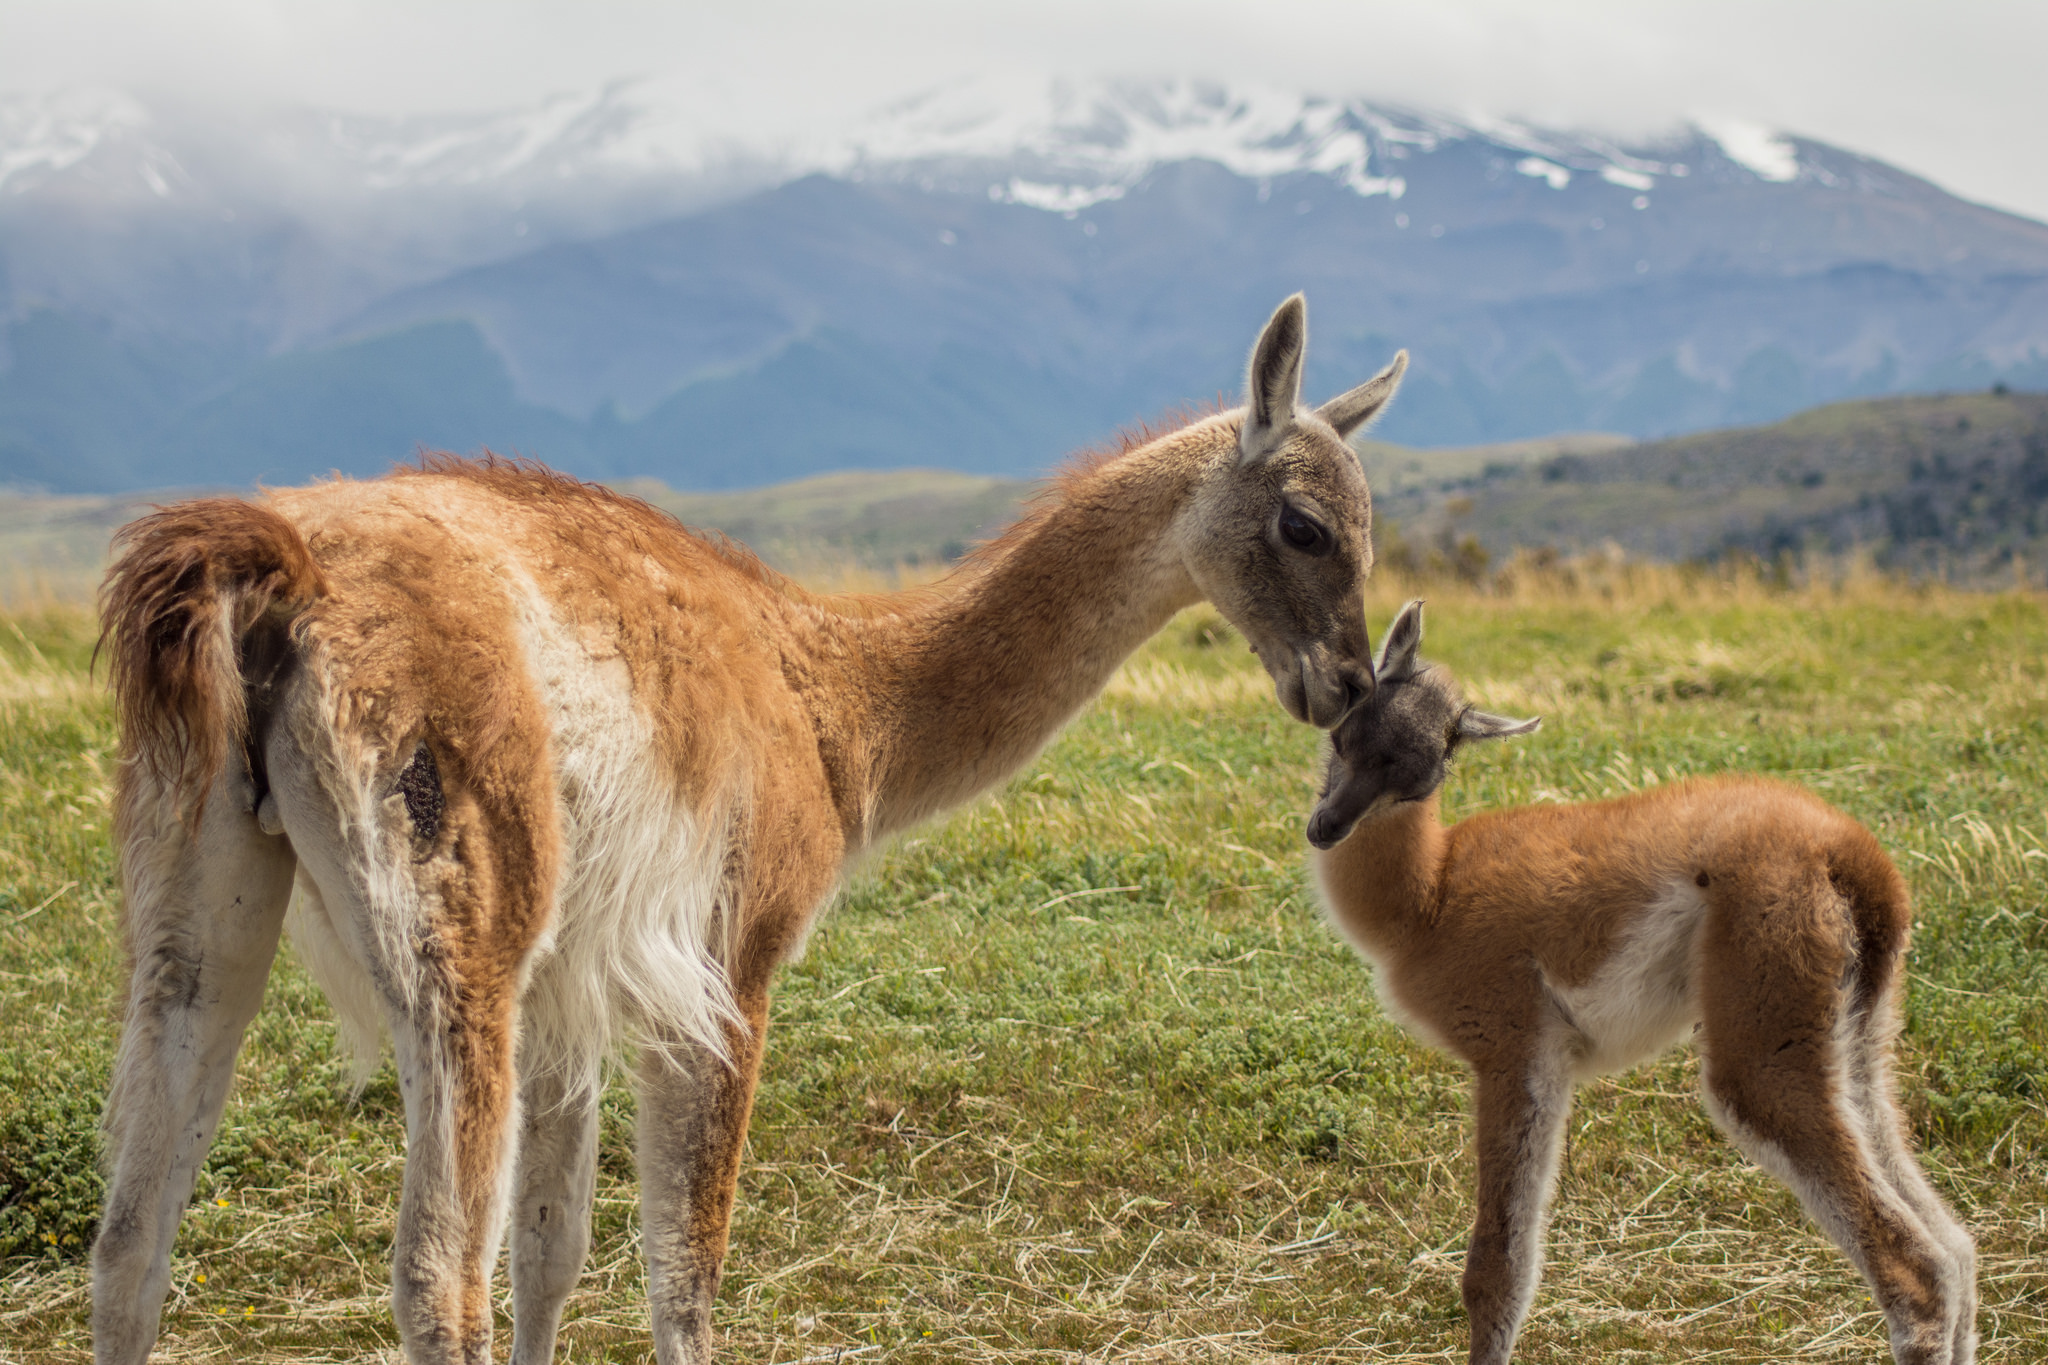 torres paine del patagonia guanaco guanacos chile mountains wildlife pumas facts tracking gang fascinating andes argentina scenery focus camera should